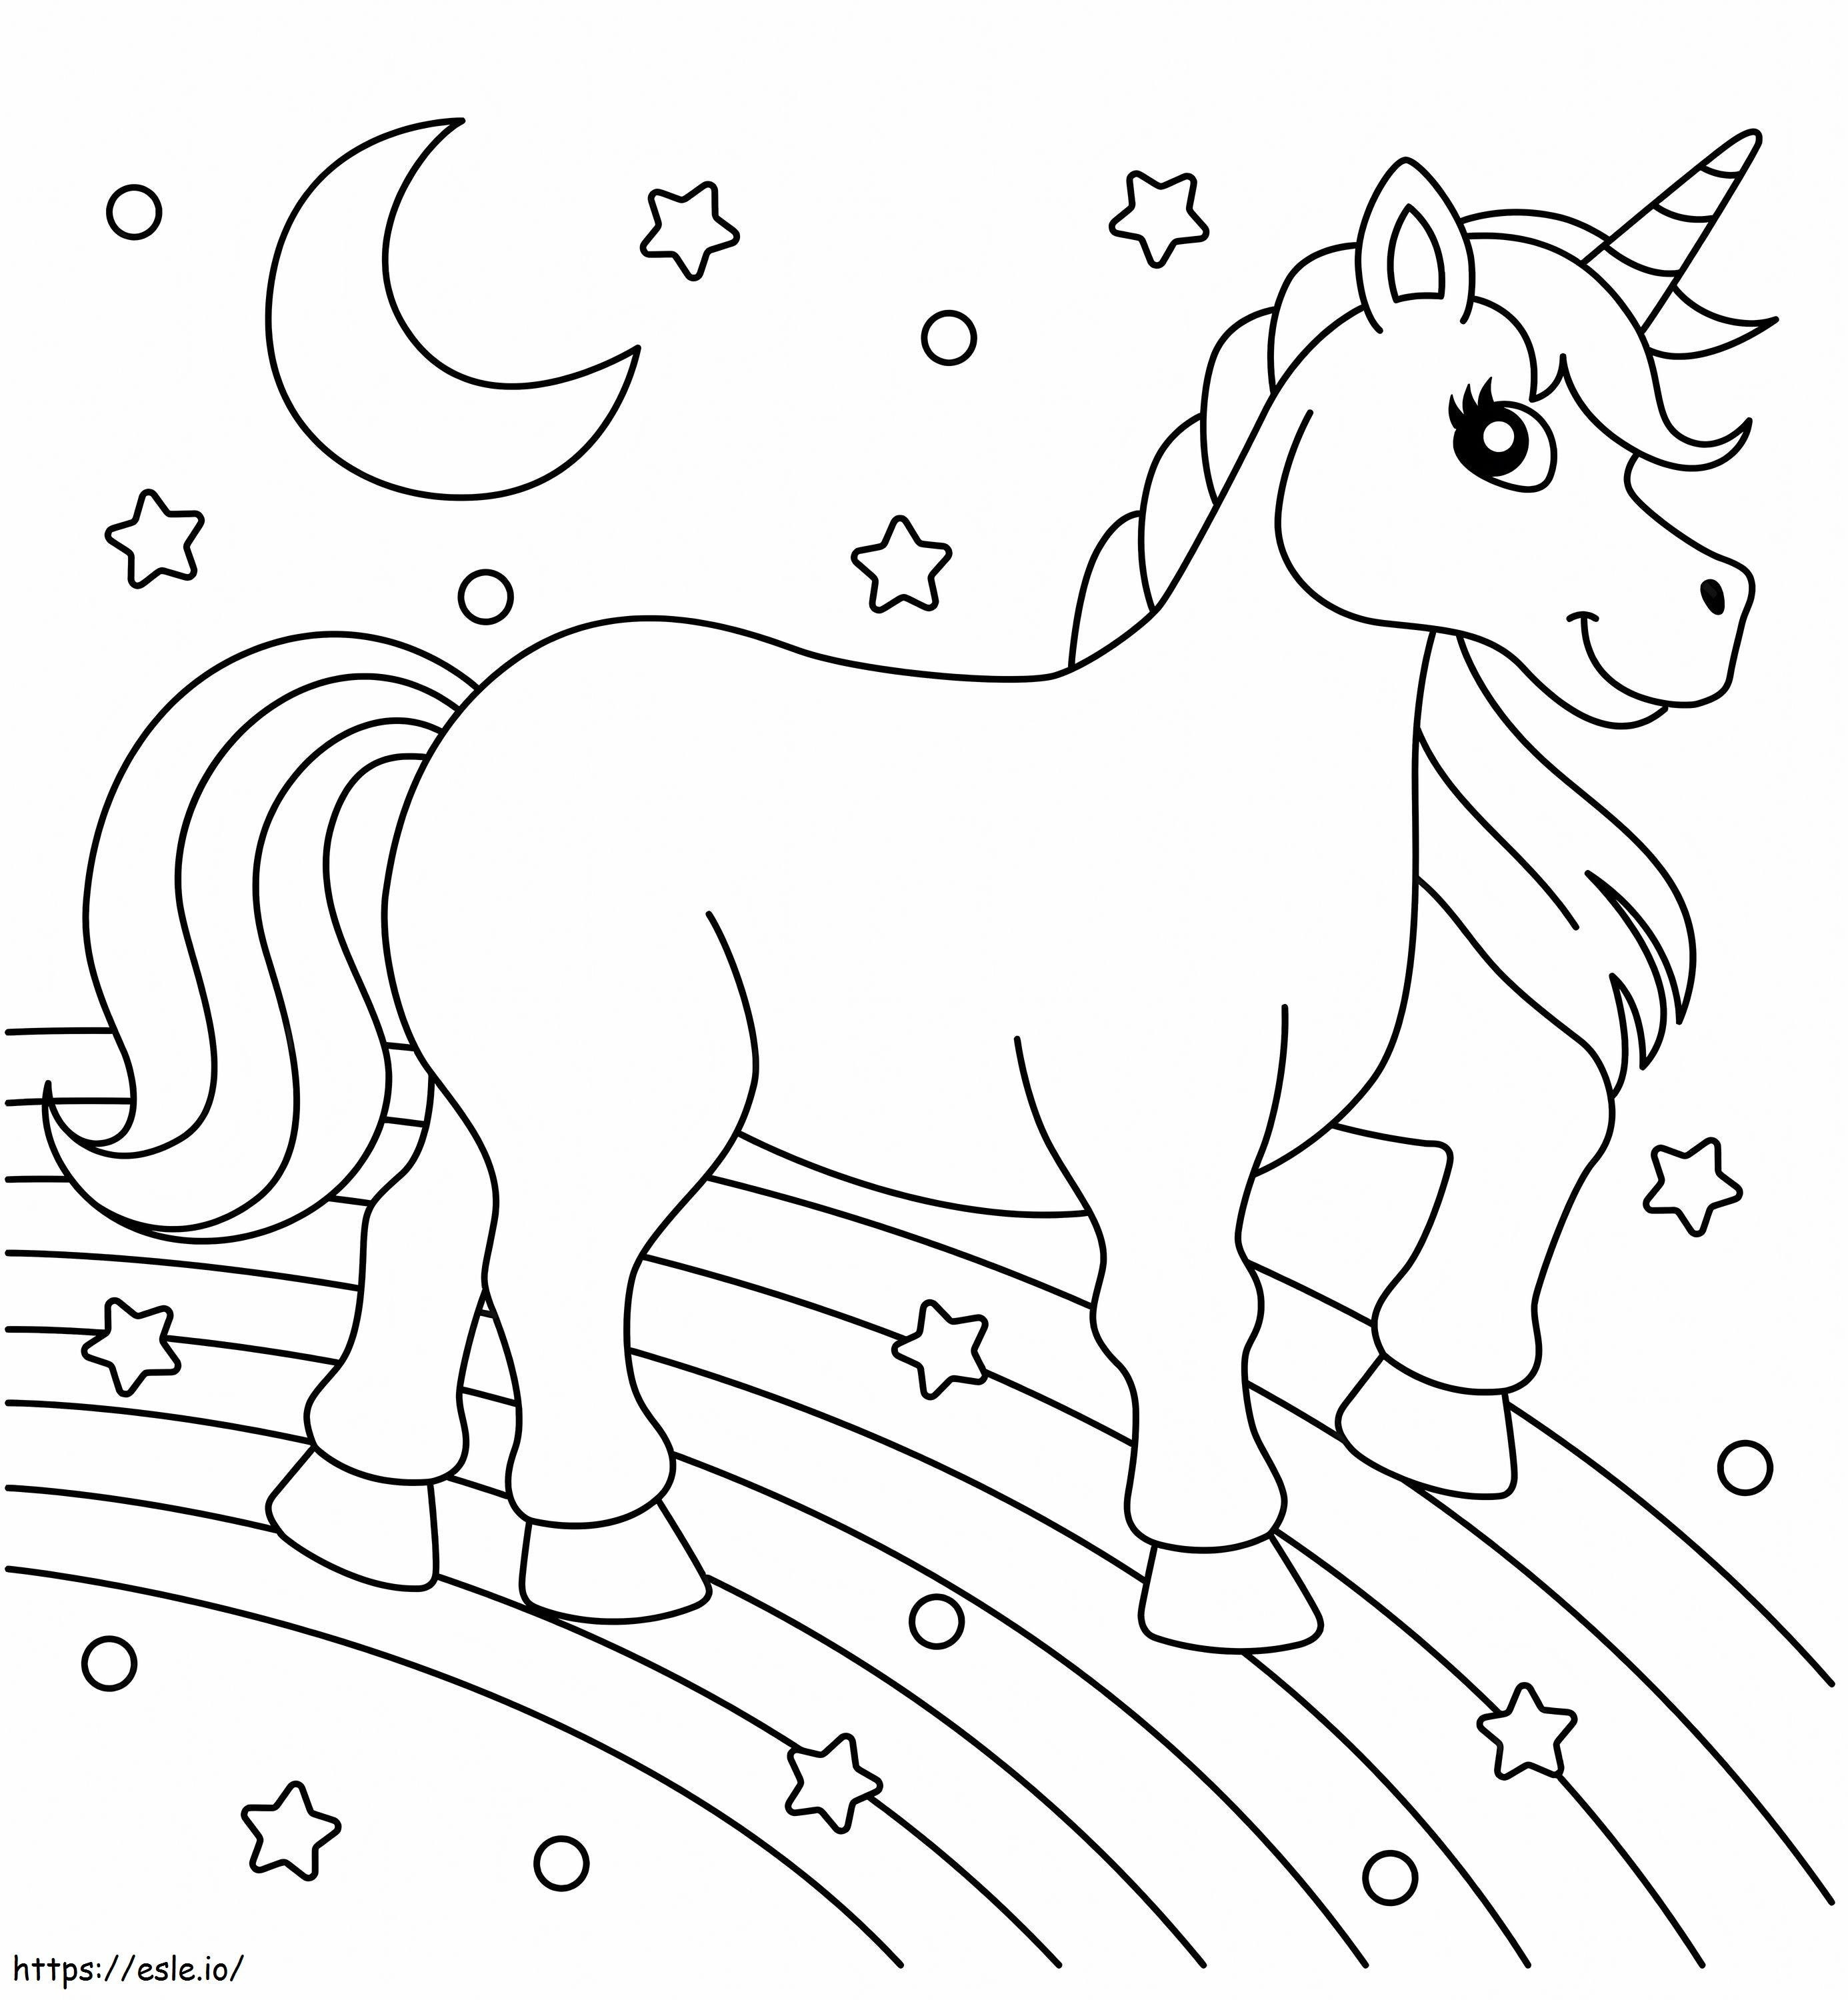 Unicorn Walking On The Rainbow coloring page